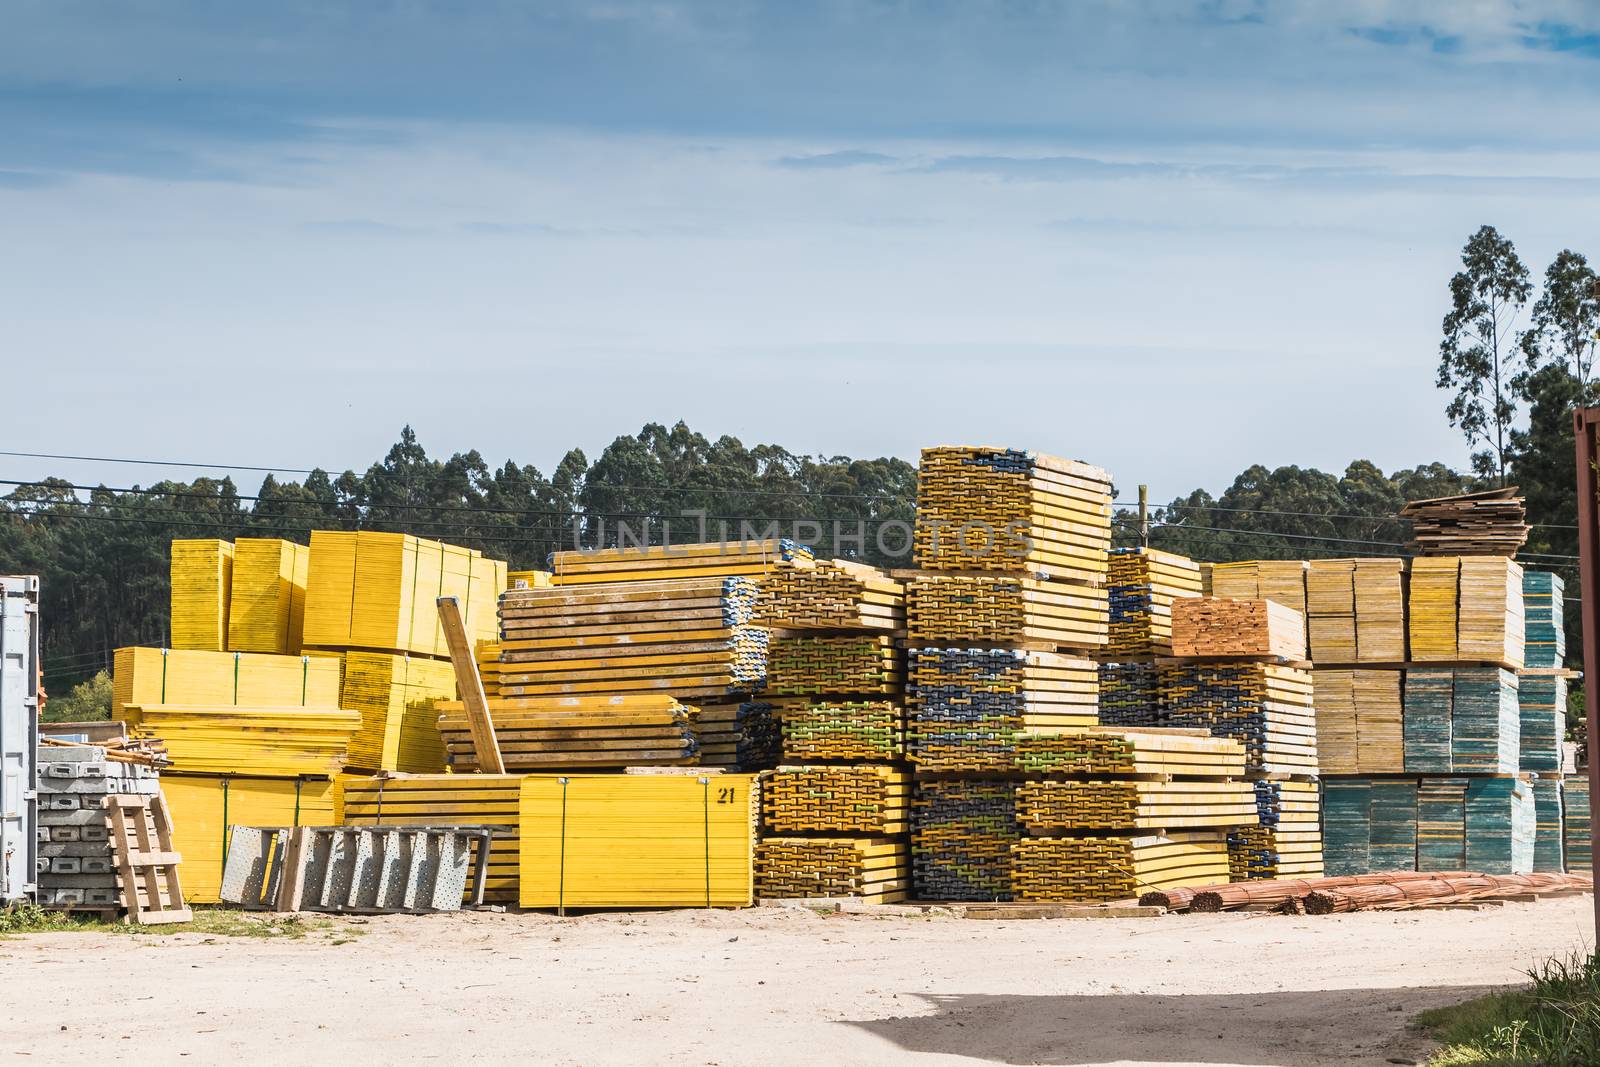 Vila Cha near Esposende, Portugal - May 9, 2018: Pallet wood storage in a company in the city center on a spring day